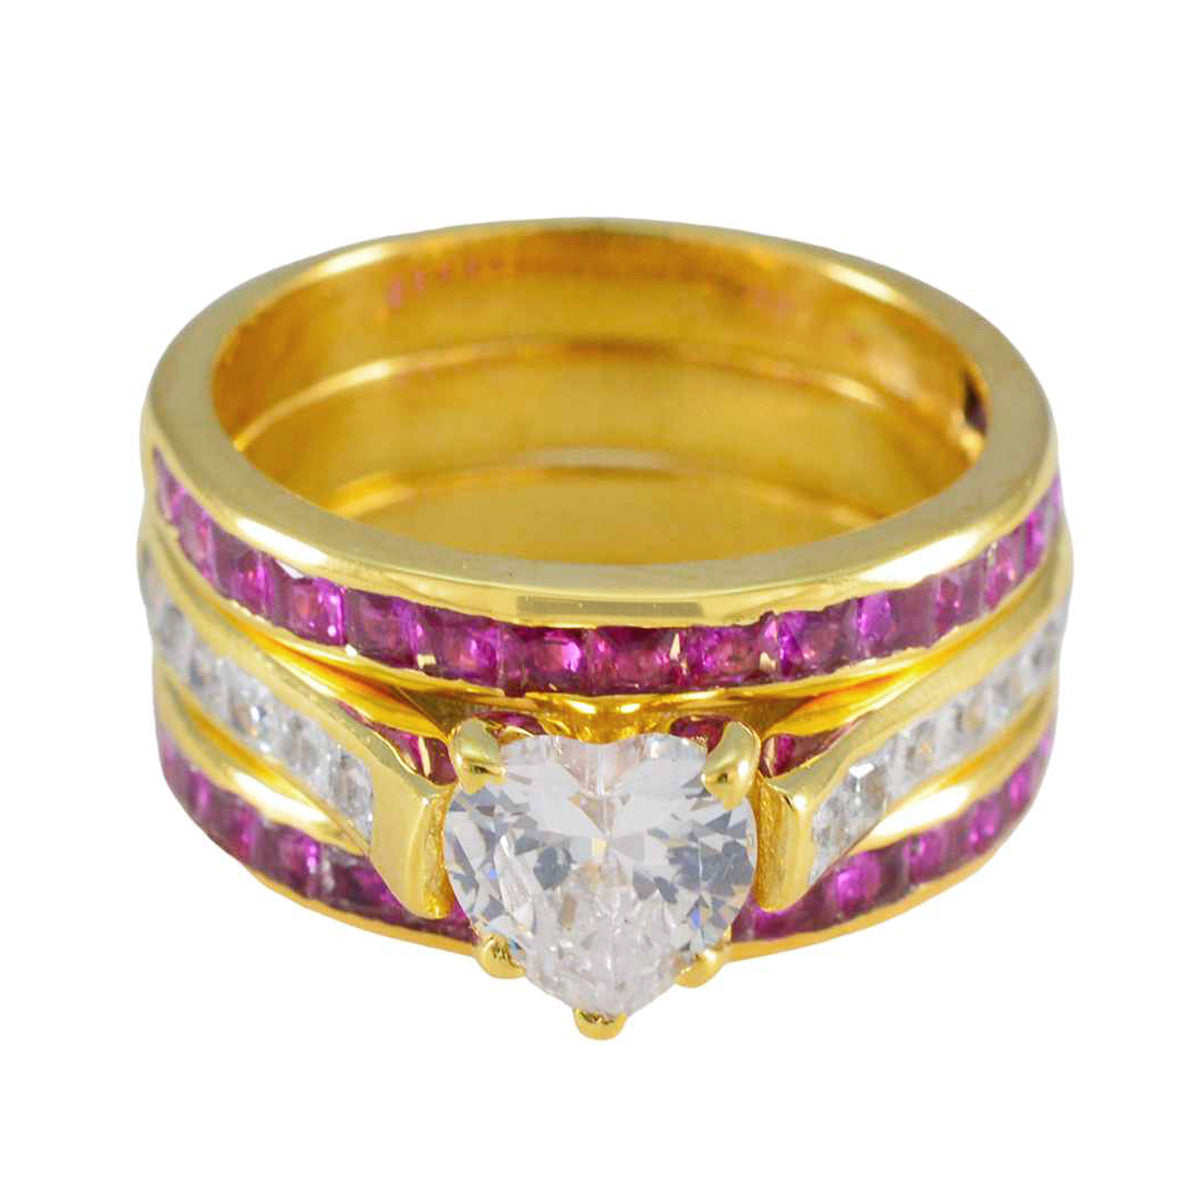 Riyo Wholesale Silver Ring With Yellow Gold Plating Ruby CZ Stone Heart Shape Prong Setting Bridal Jewelry Mothers Day Ring